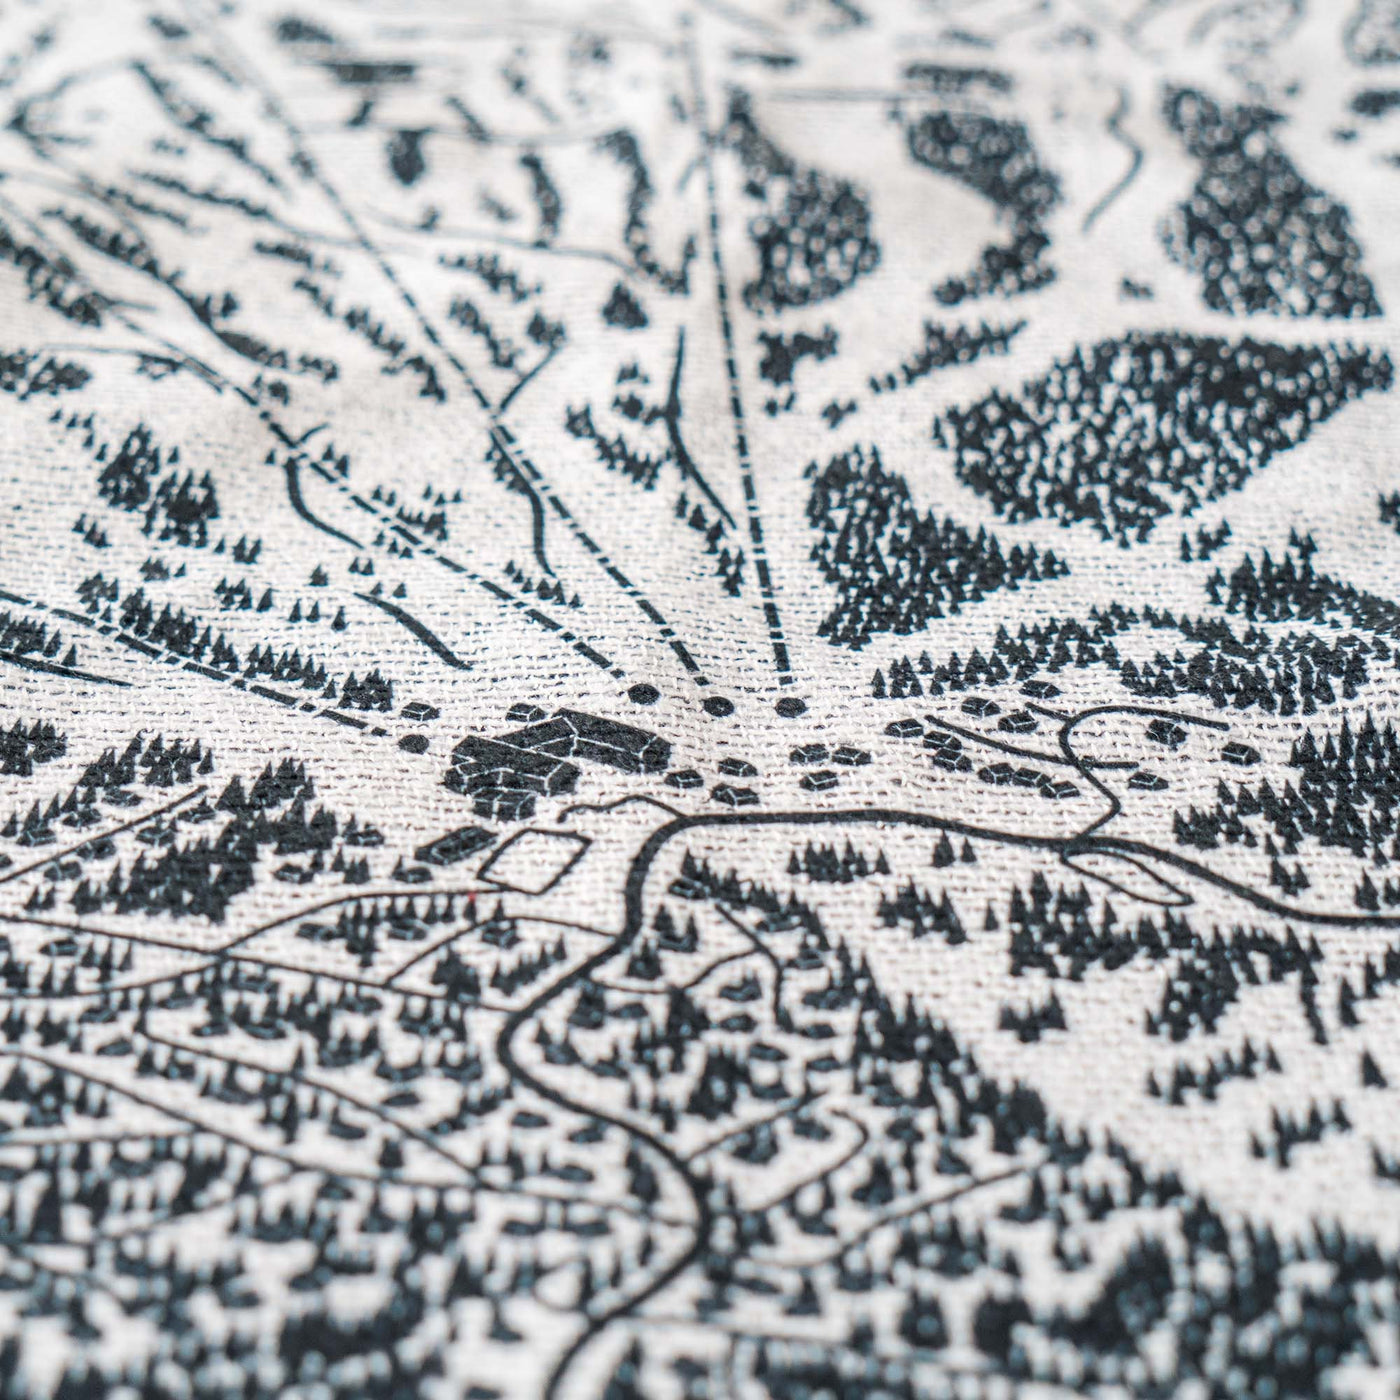 Crested Butte, Colorado Ski Trail Map Blankets